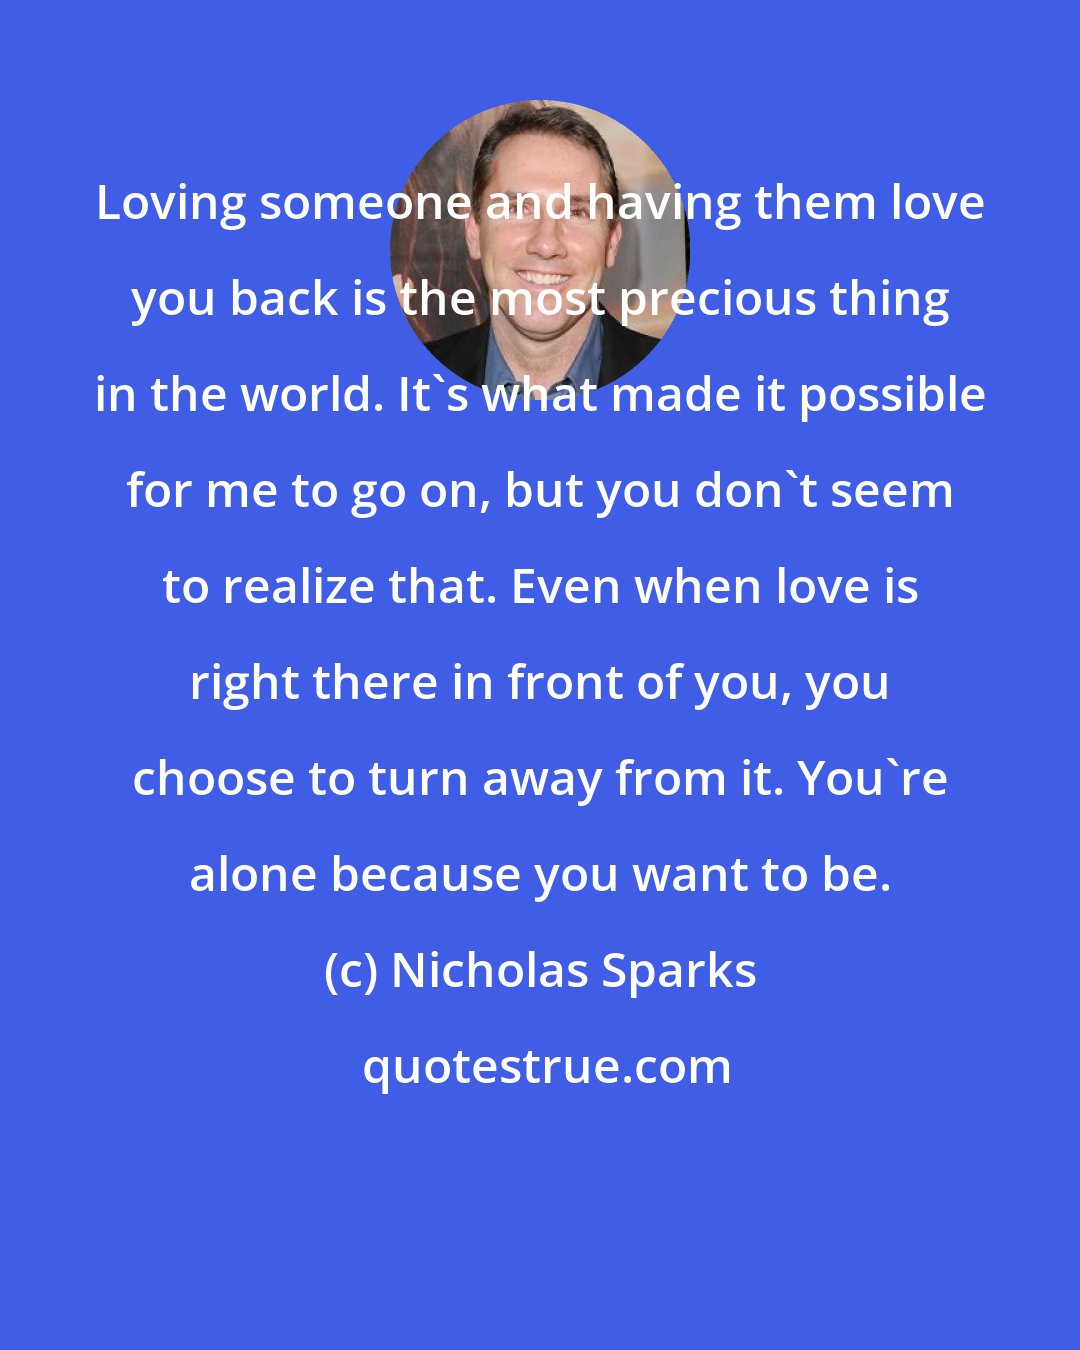 Nicholas Sparks: Loving someone and having them love you back is the most precious thing in the world. It's what made it possible for me to go on, but you don't seem to realize that. Even when love is right there in front of you, you choose to turn away from it. You're alone because you want to be.